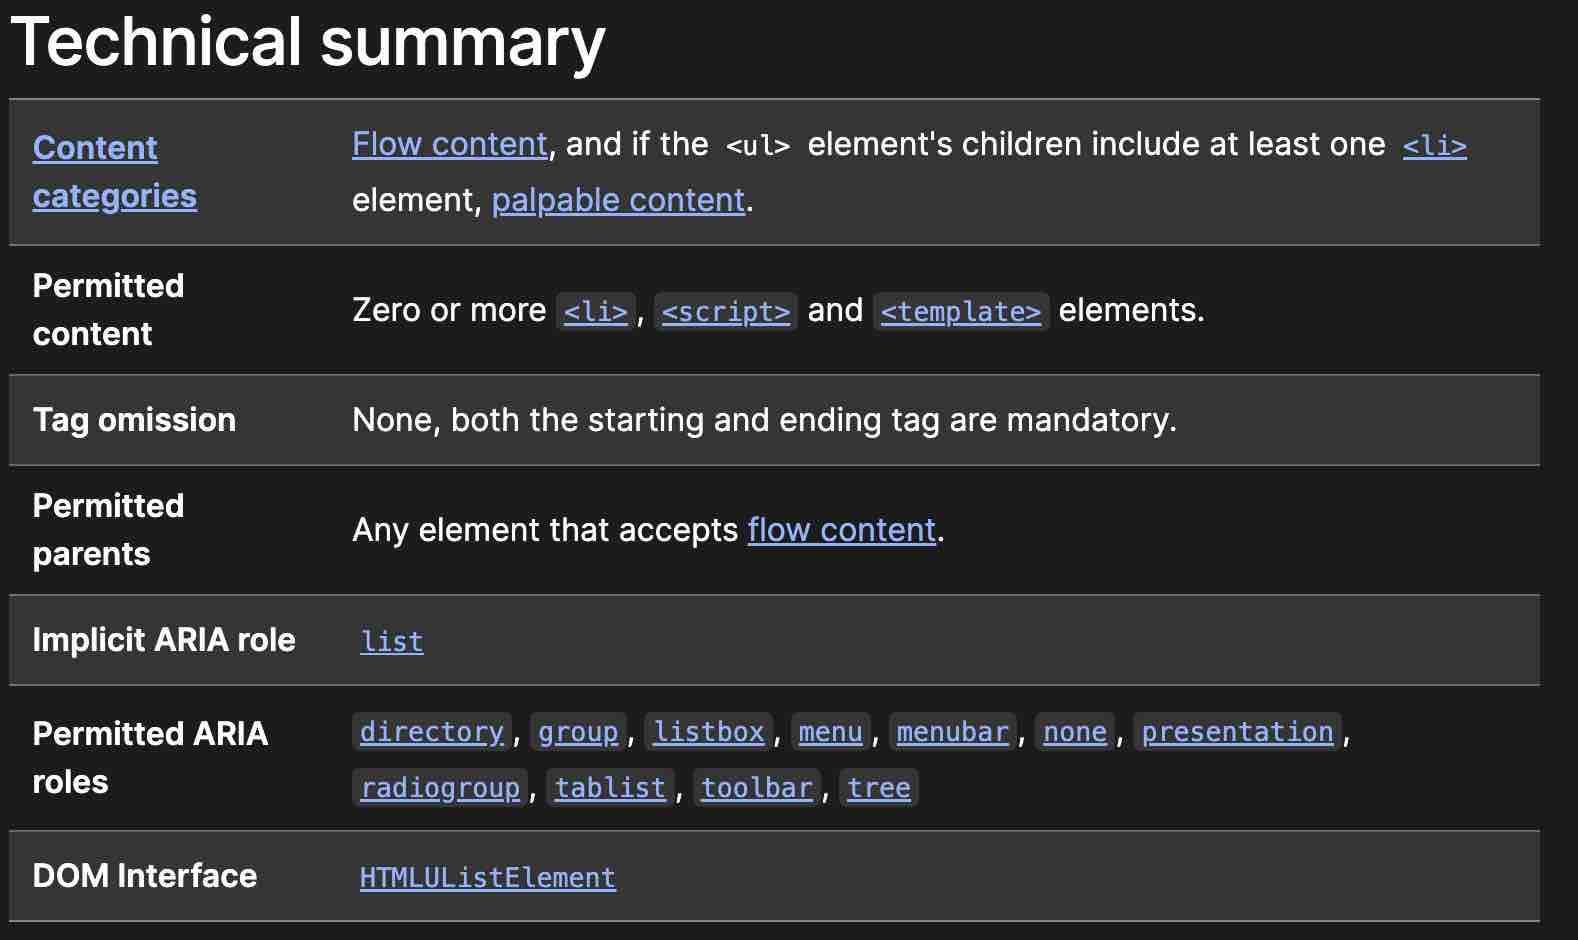 The technical summary for the UL element. It illustrates that a UL can only have li script and template elements inside it